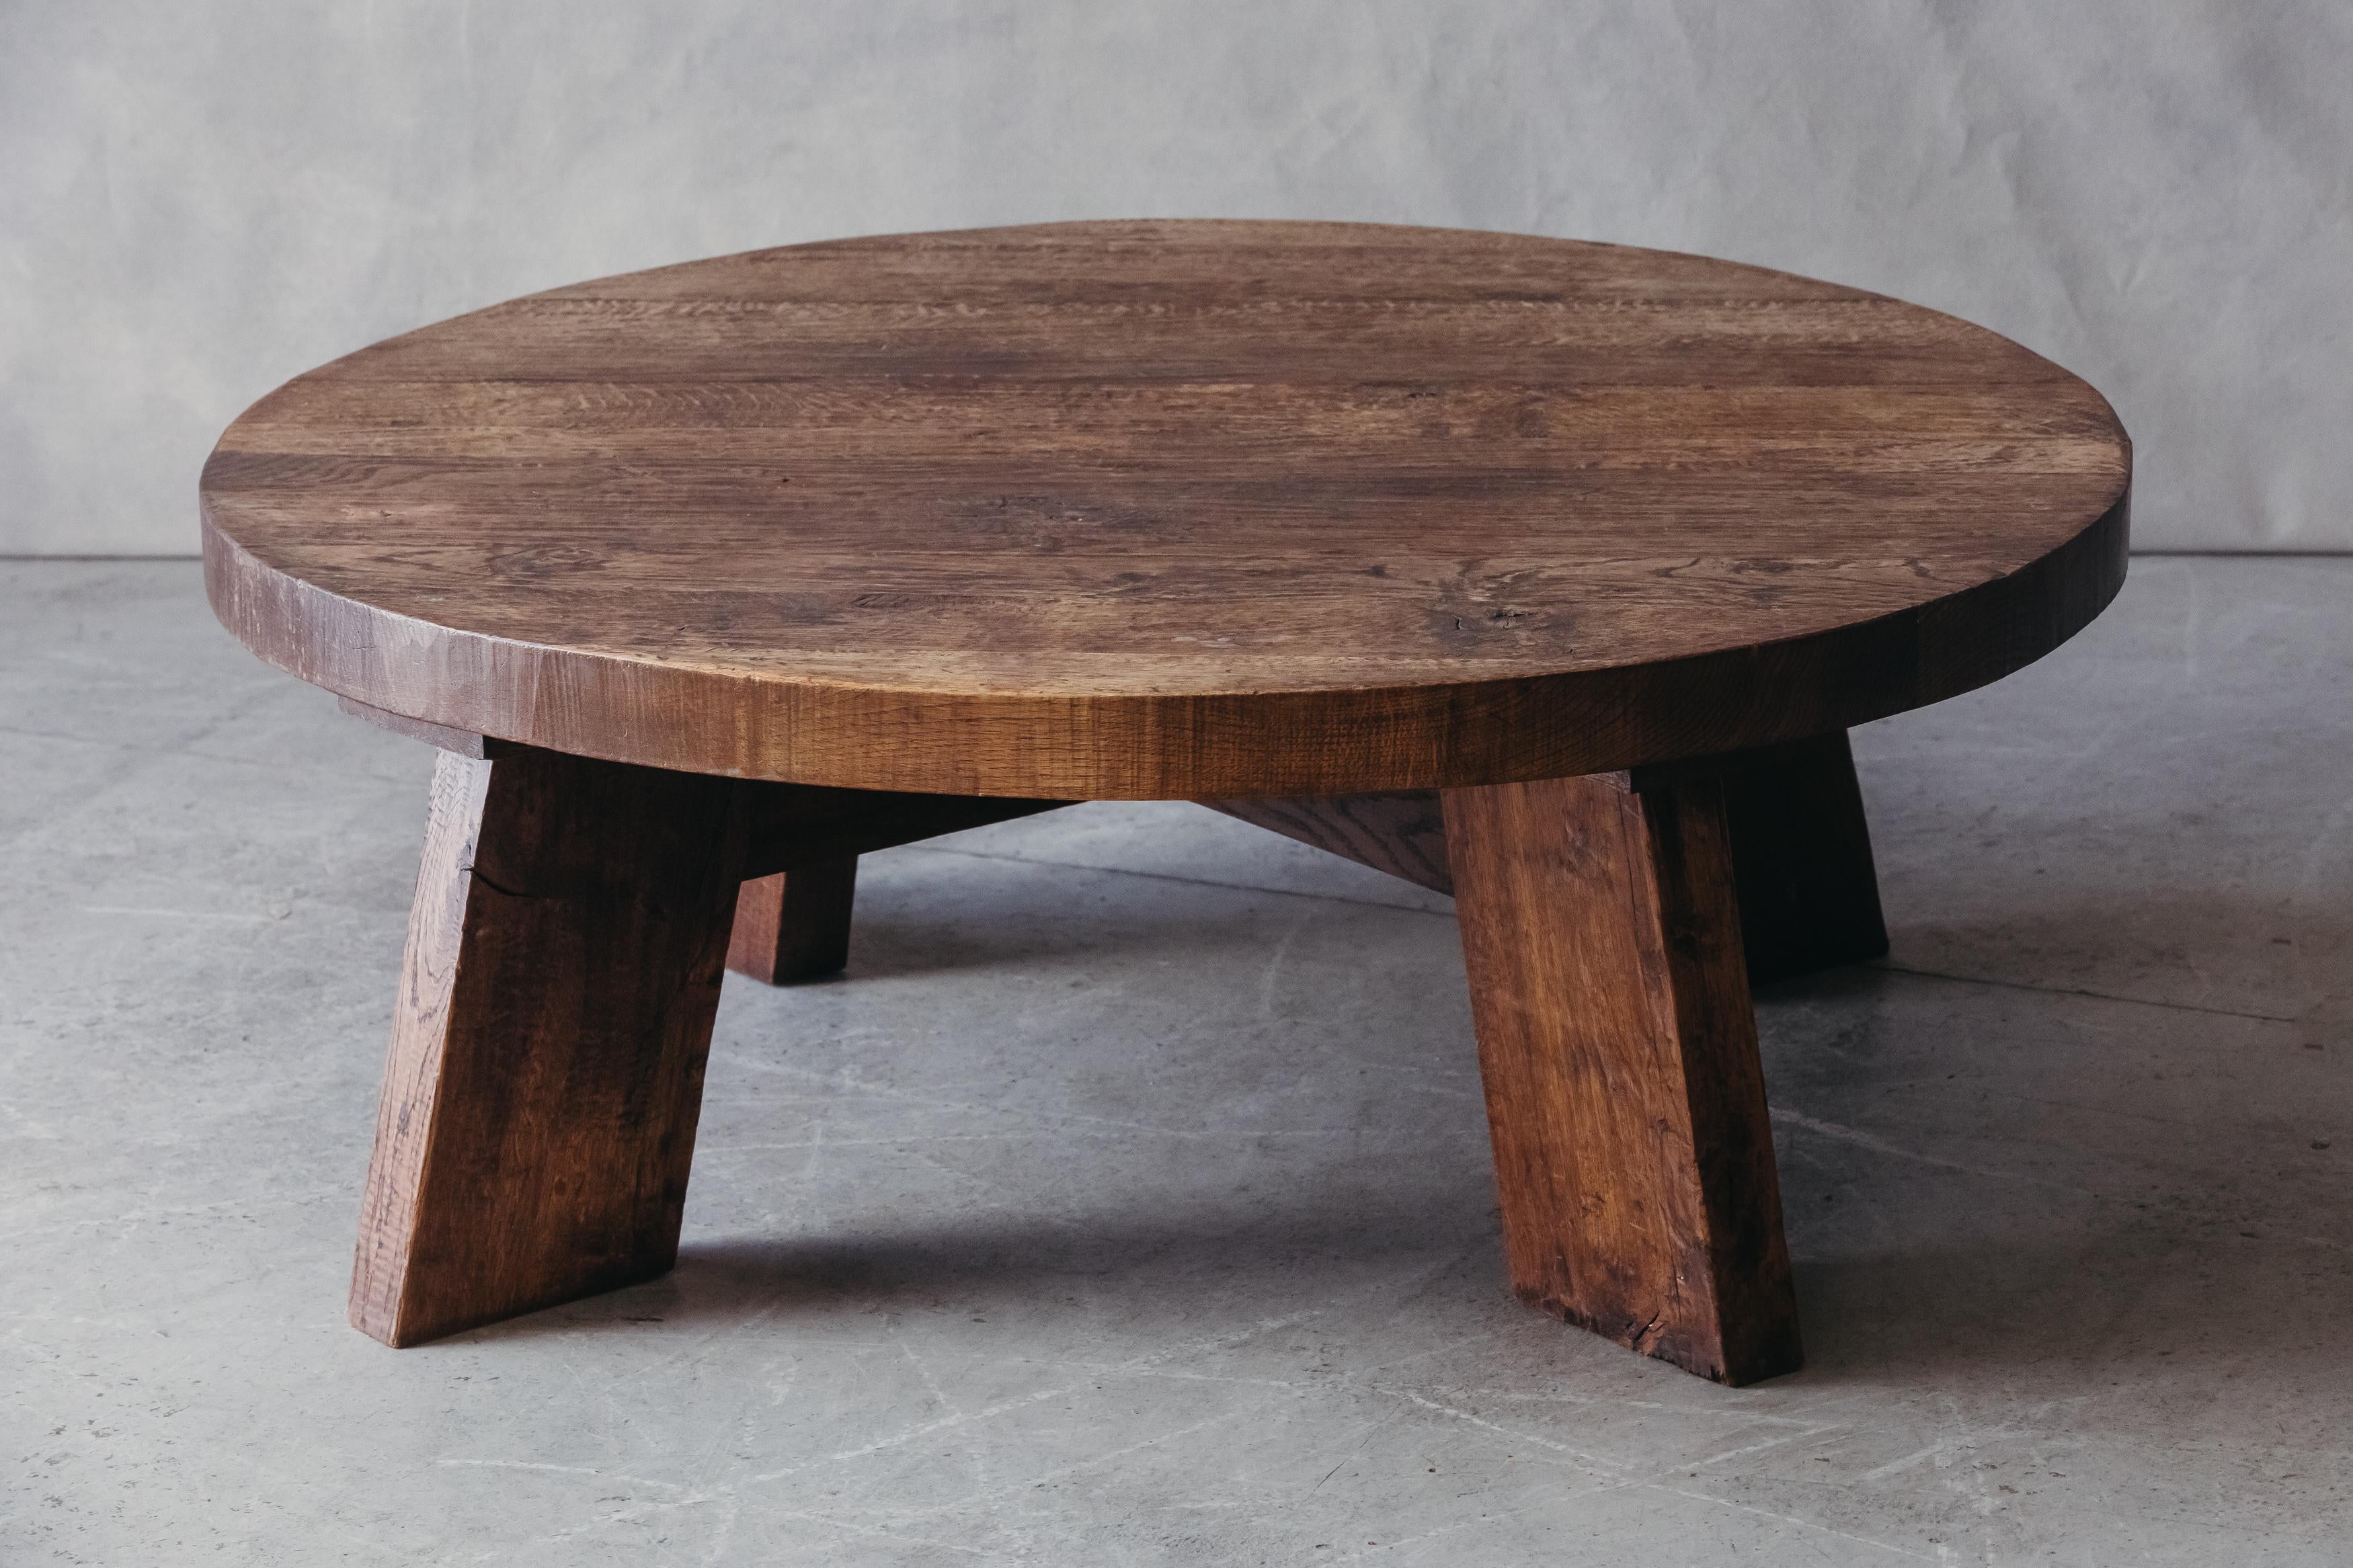 Vintage circular coffee table from france, circa 1970. Solid oak construction with light wear and use.

We don't have the time to write an extensive description on each of our pieces. We prefer to speak directly with our clients. So, If you have any